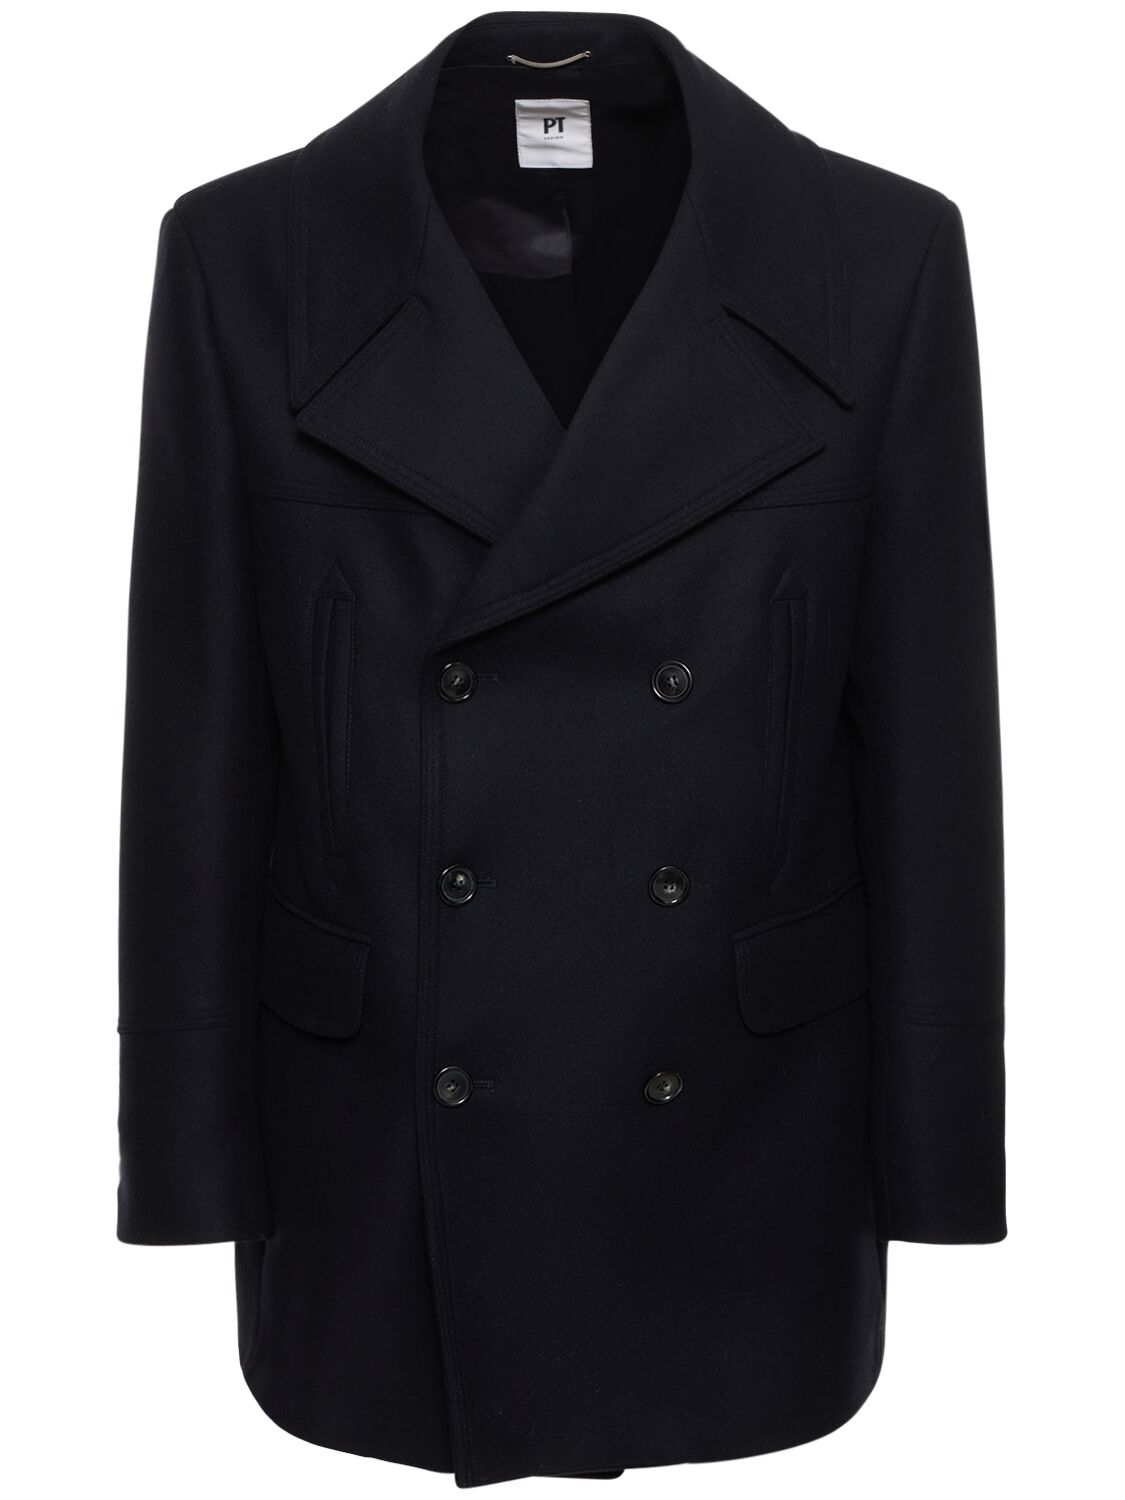 PT TORINO DOUBLE BREASTED WOOL BLEND PEACOAT